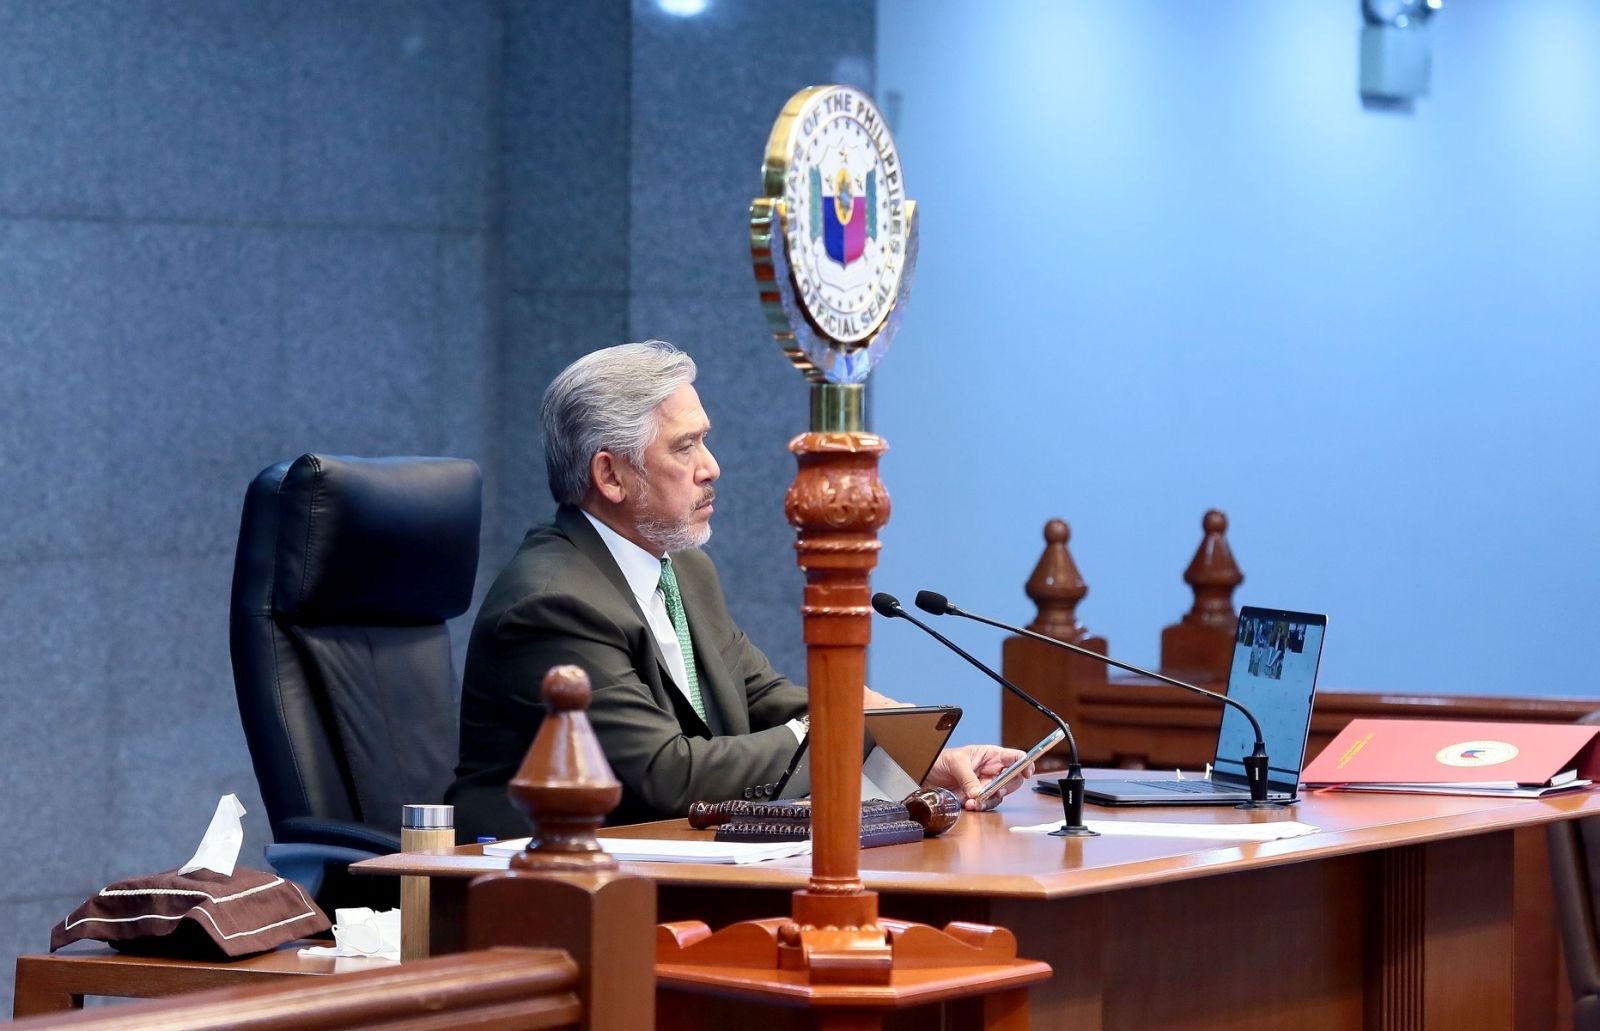 ‘Do not be misled’: House delayed 2021 budget bill by 1 month, not 1 day – Sotto